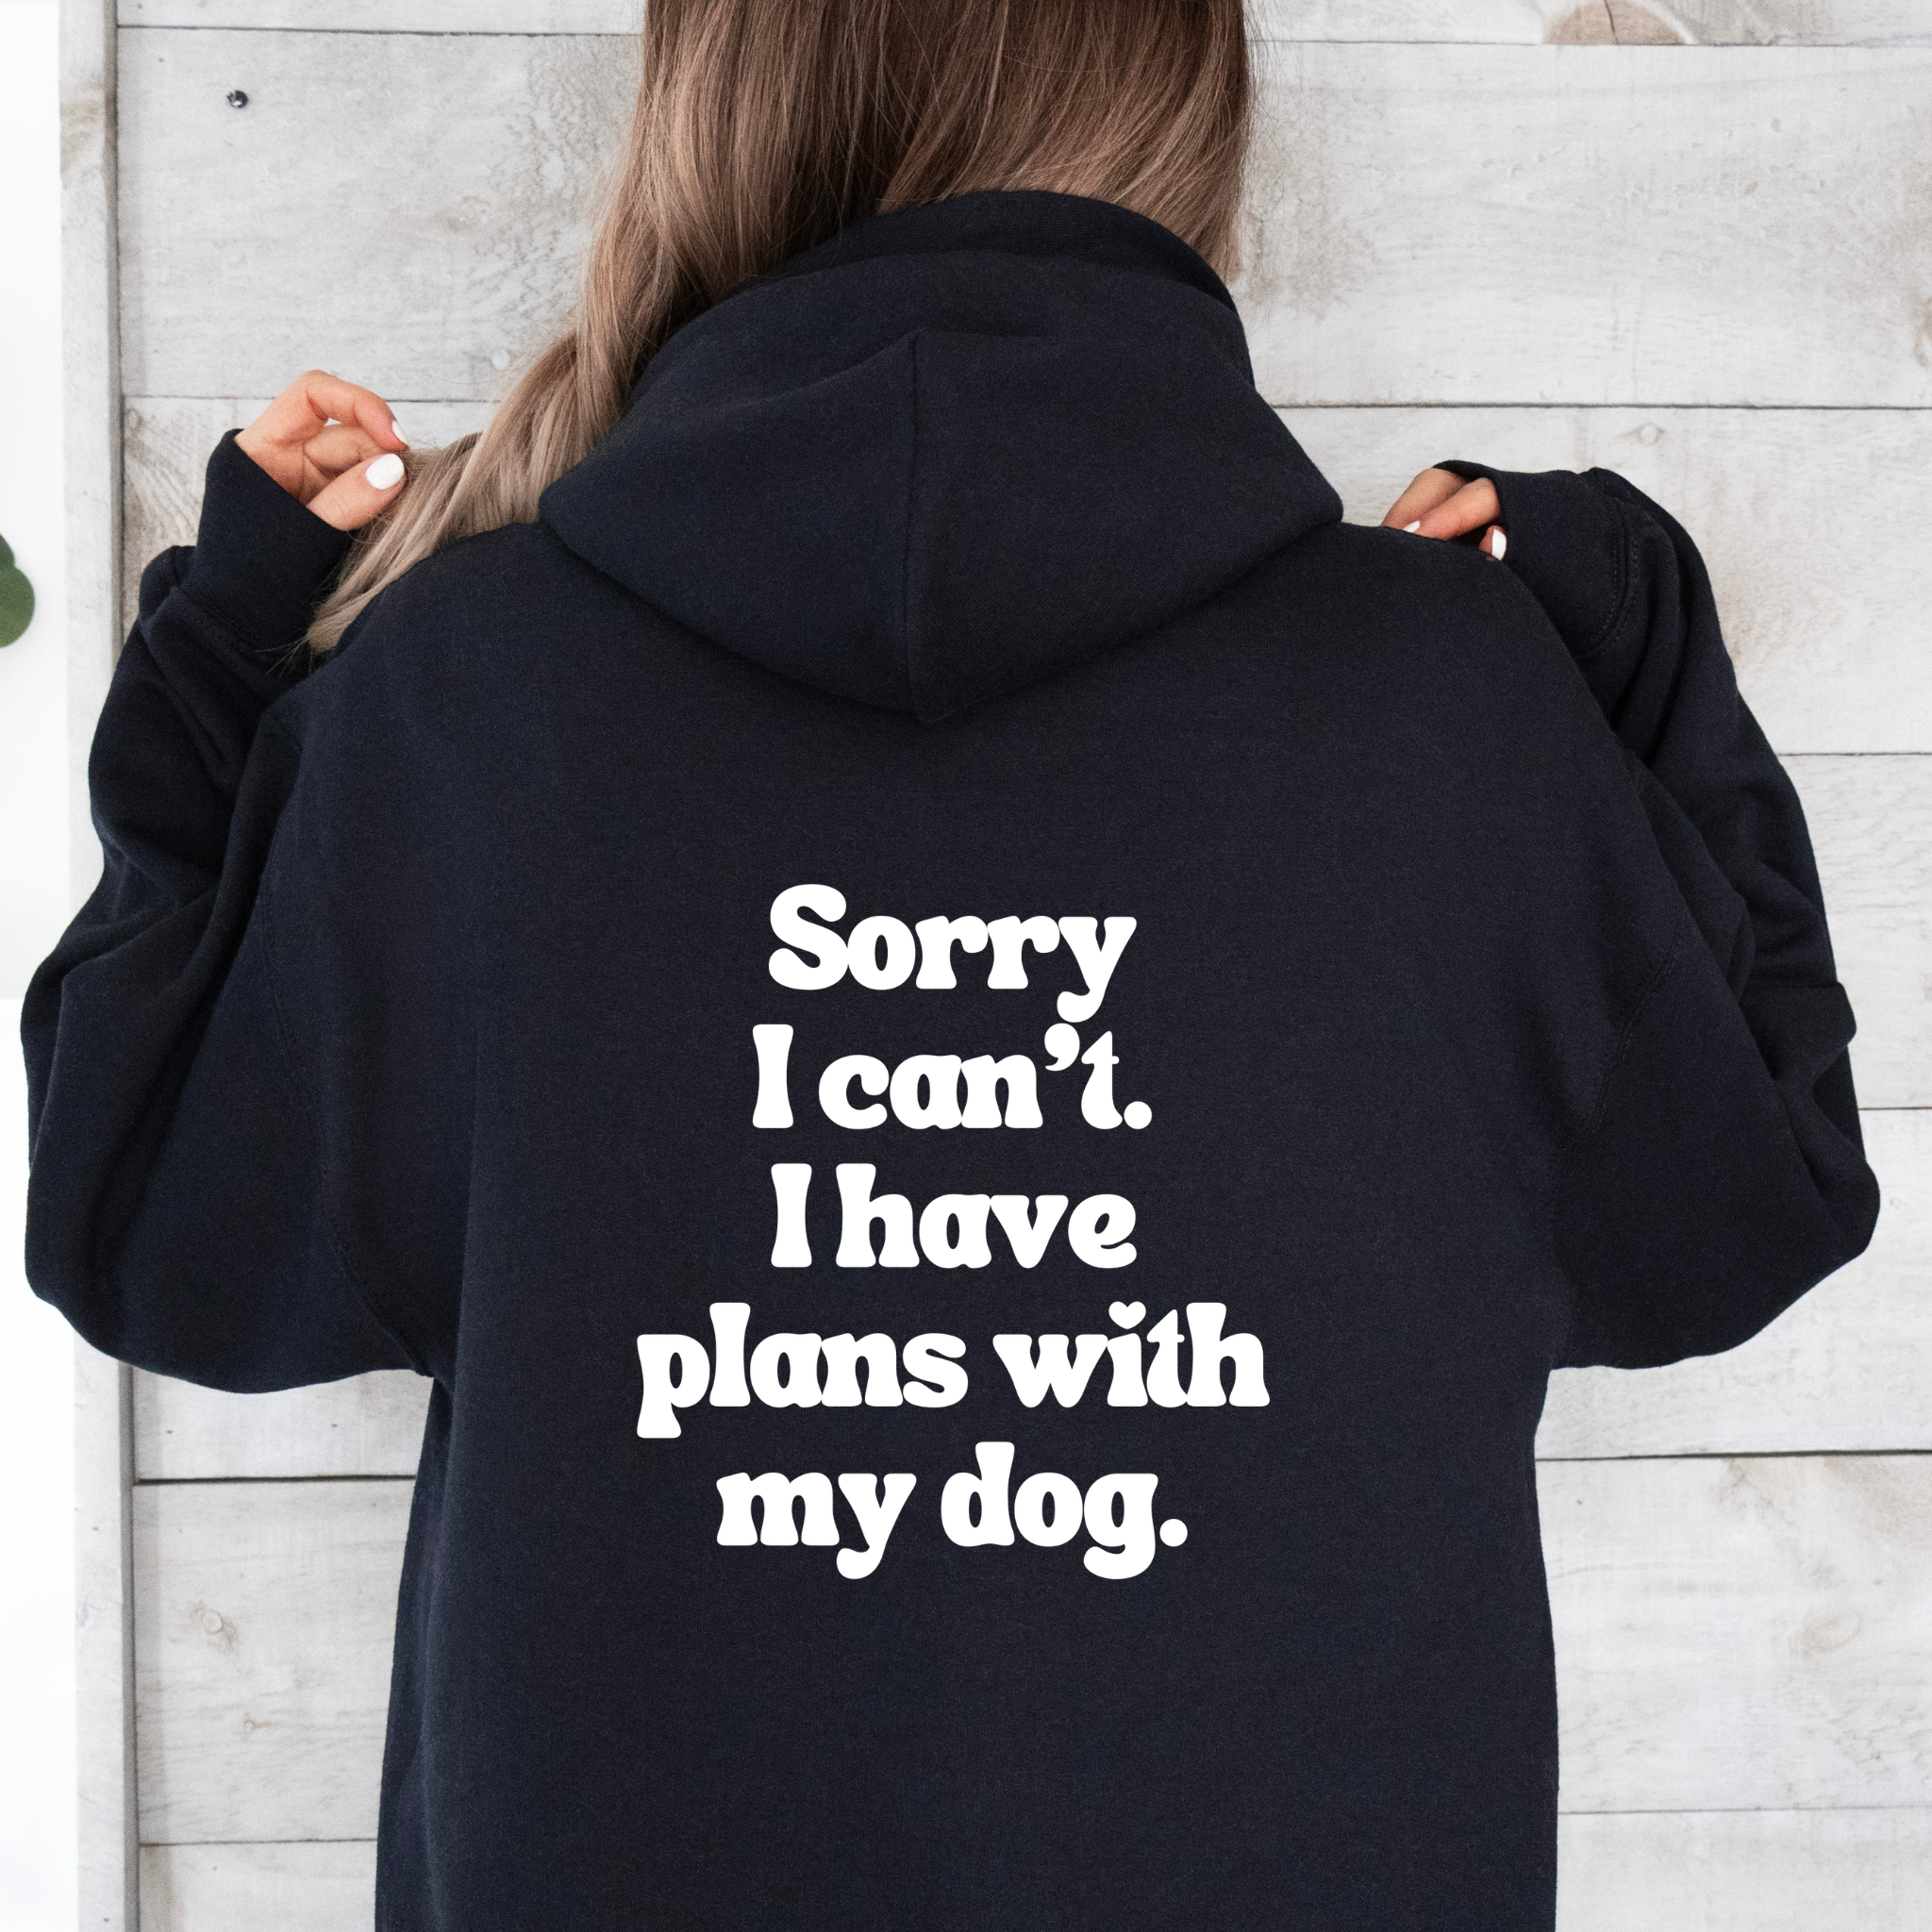 'Plans with my dog' hoodie